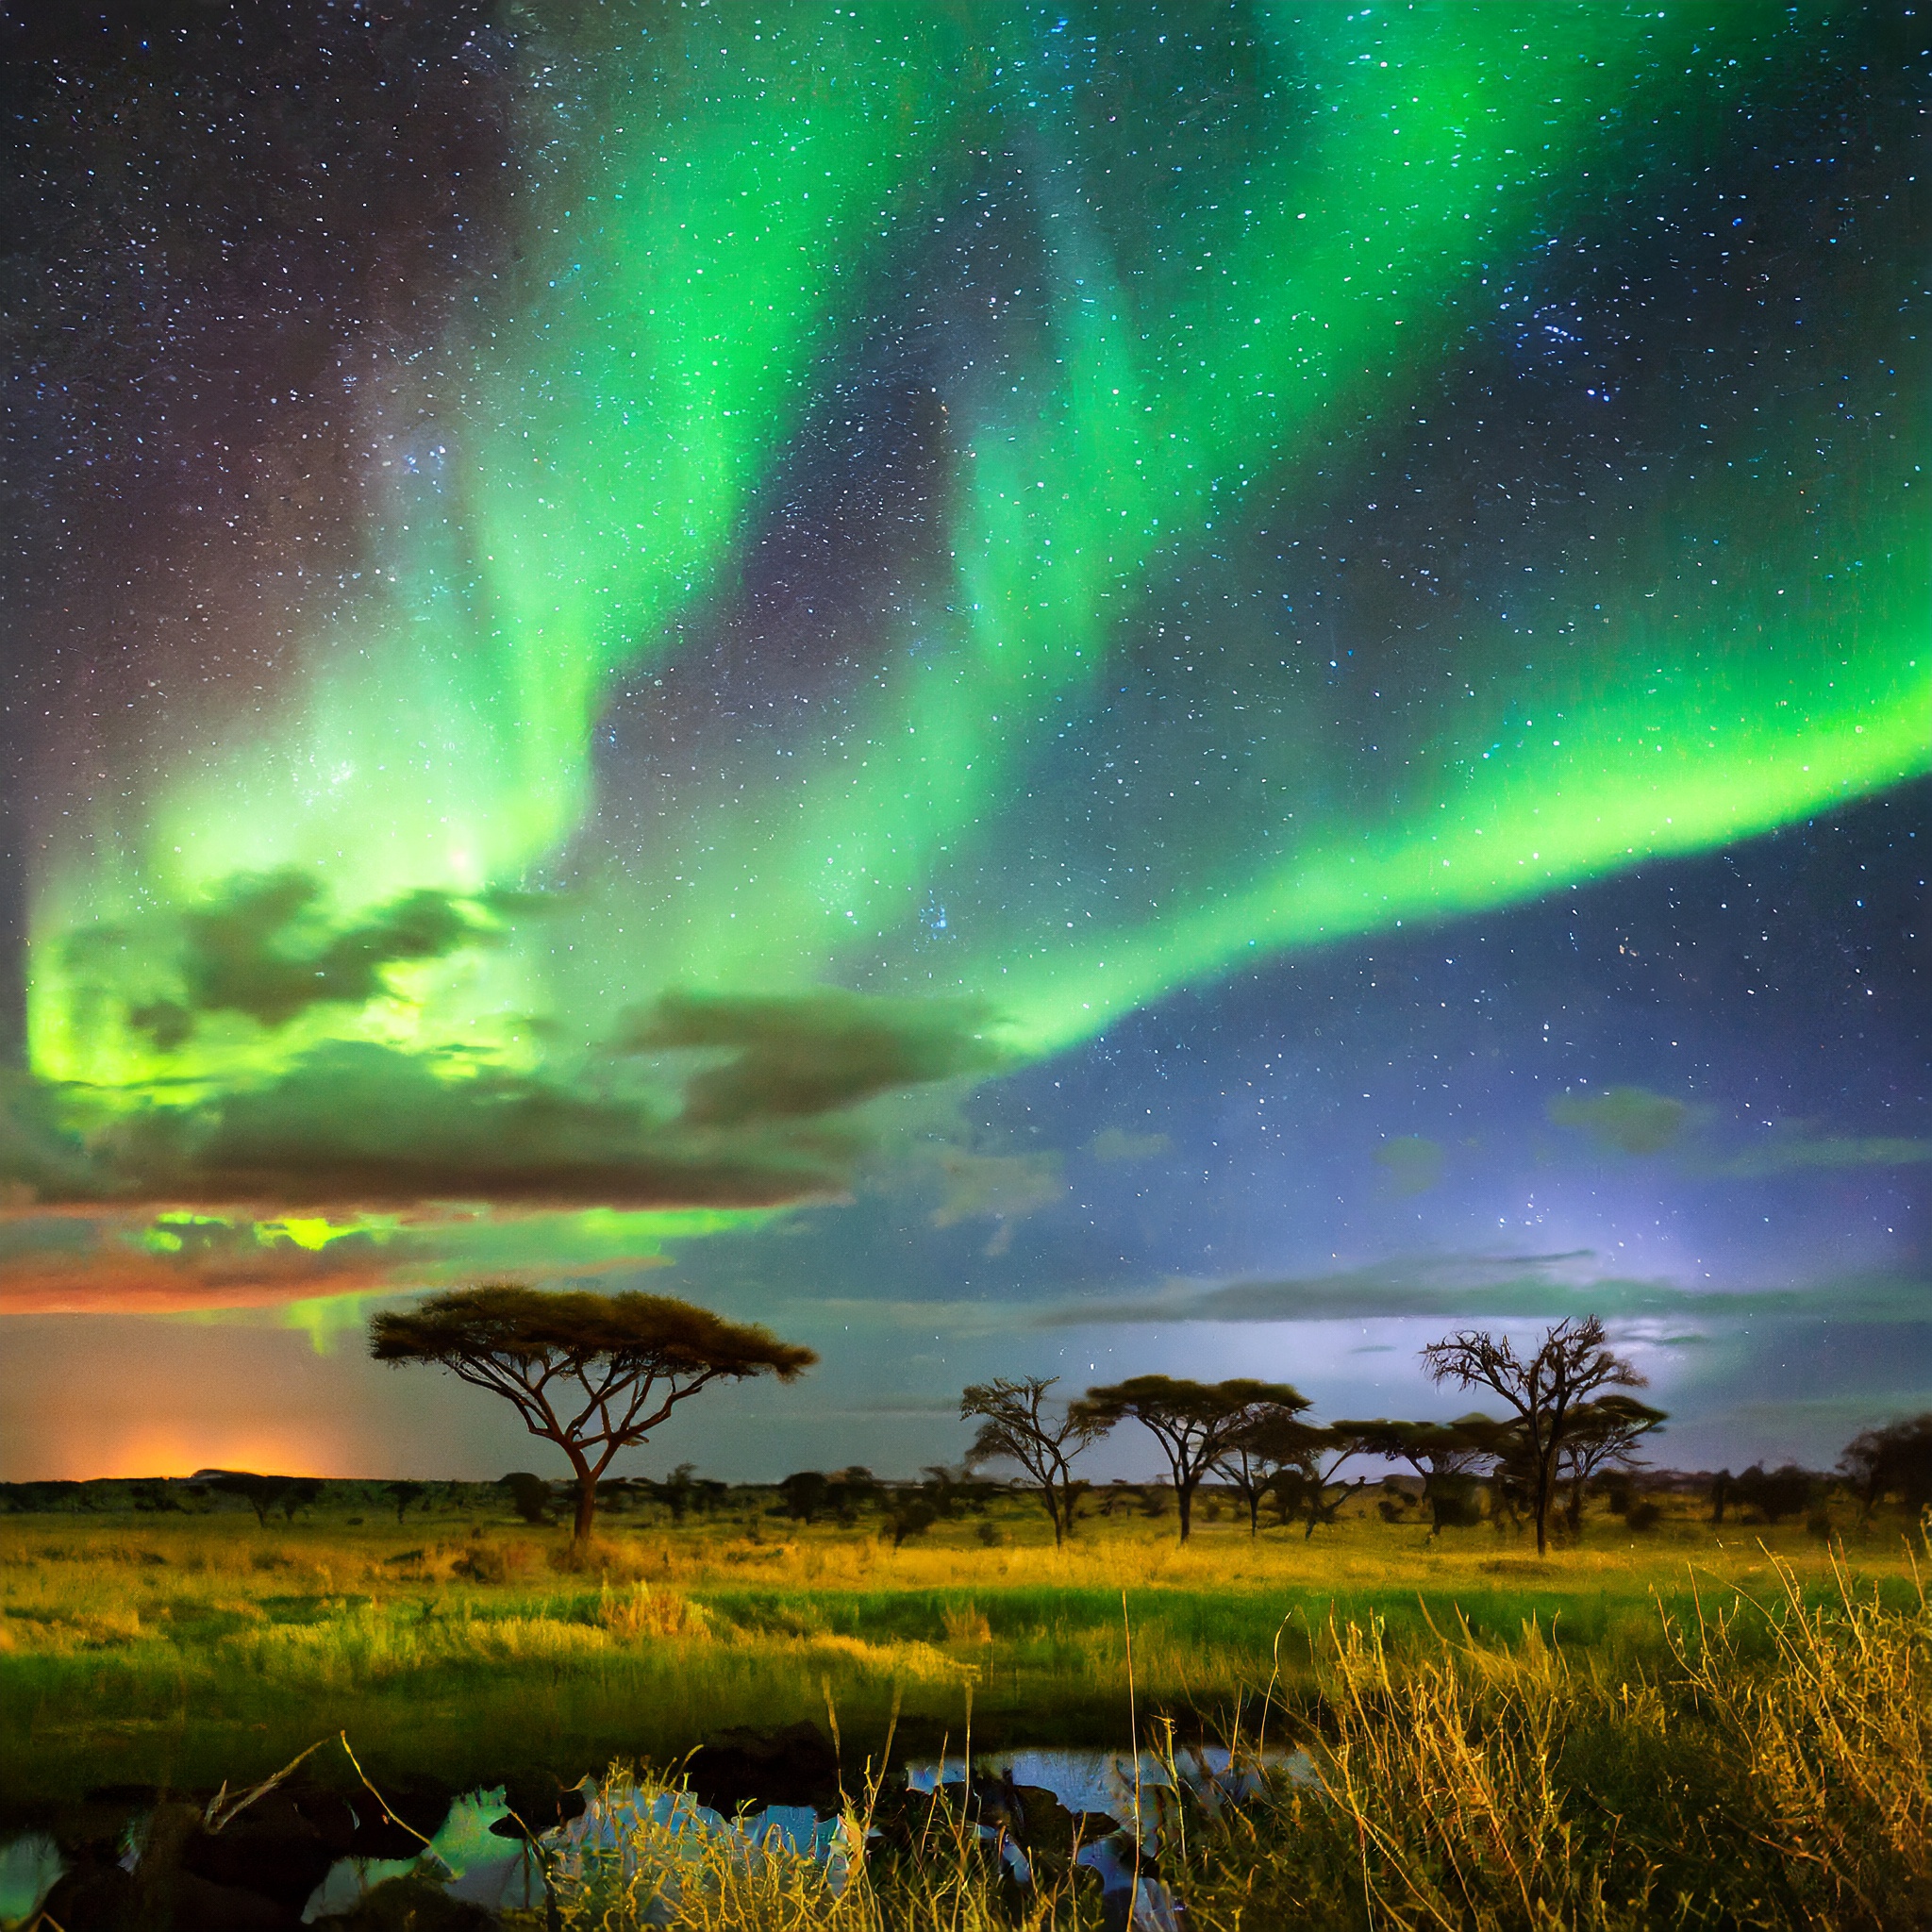 Spectacular auroras could be seen over the African Savanna during Laschamps Excursion